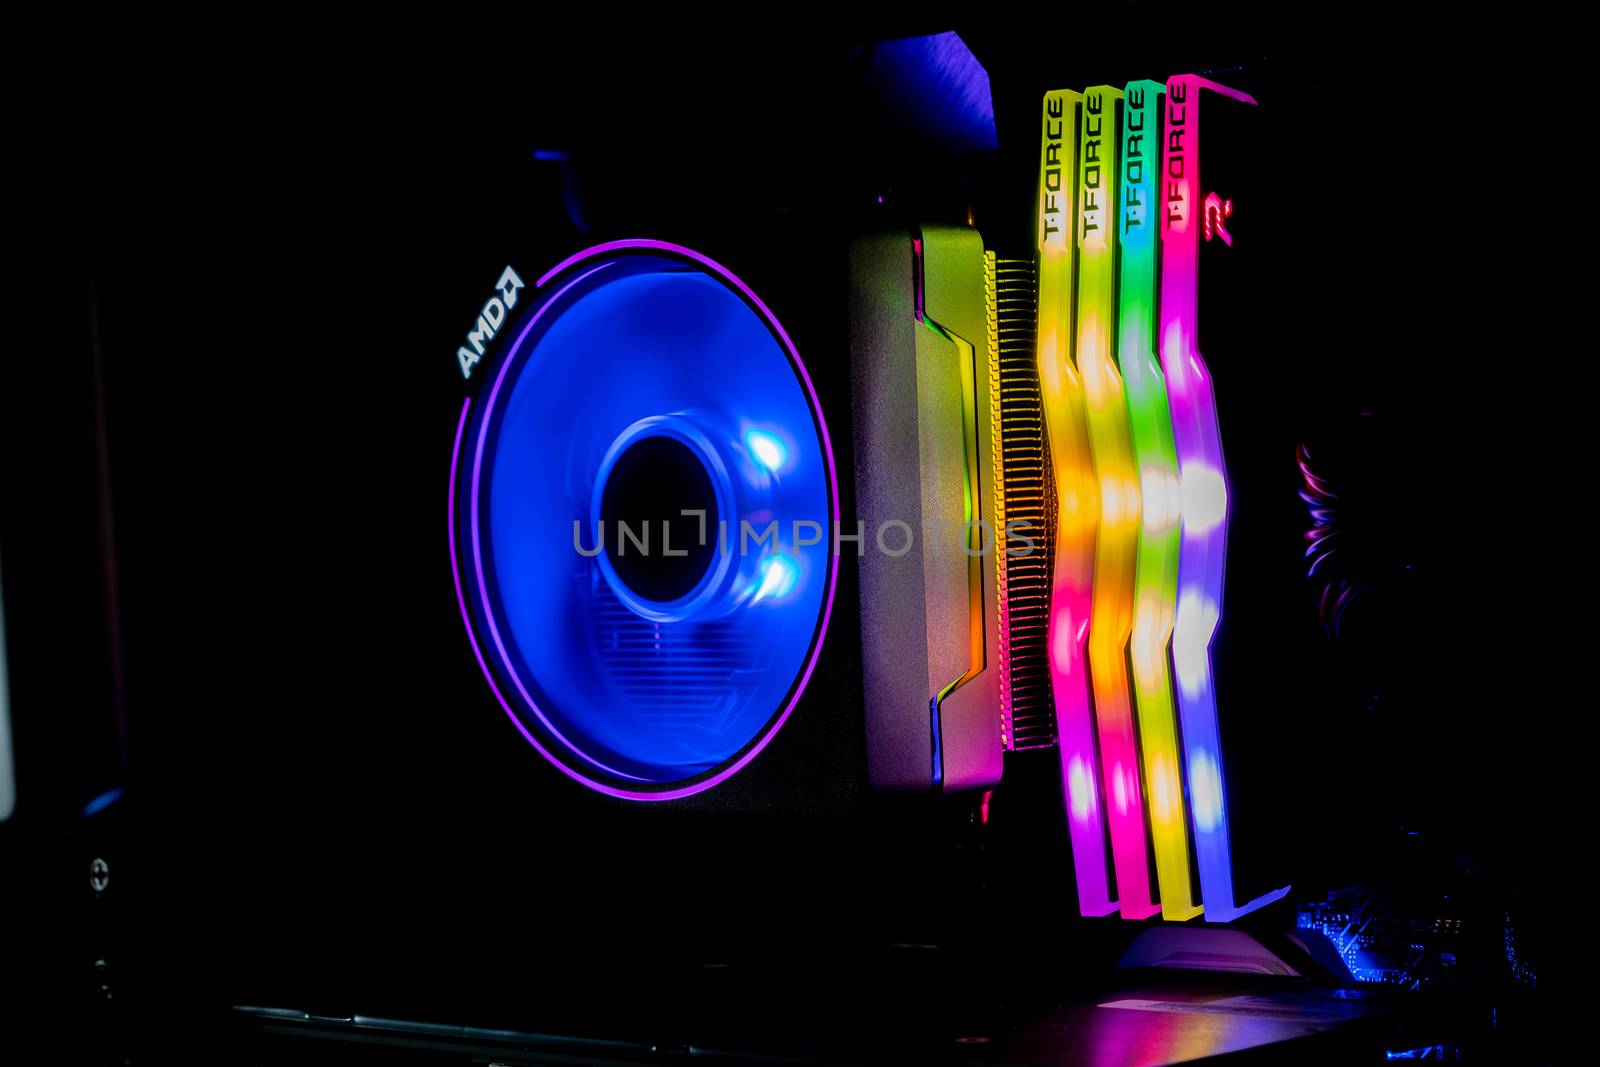 Chonburi, Thailand - MAY 16, 2020: The colorful of AMD Wraith Prism Cooler for CPU Ryzen9 3900X with four T-Force DELTA RGB DDR4 DIMMs in the computer case. by peerapixs